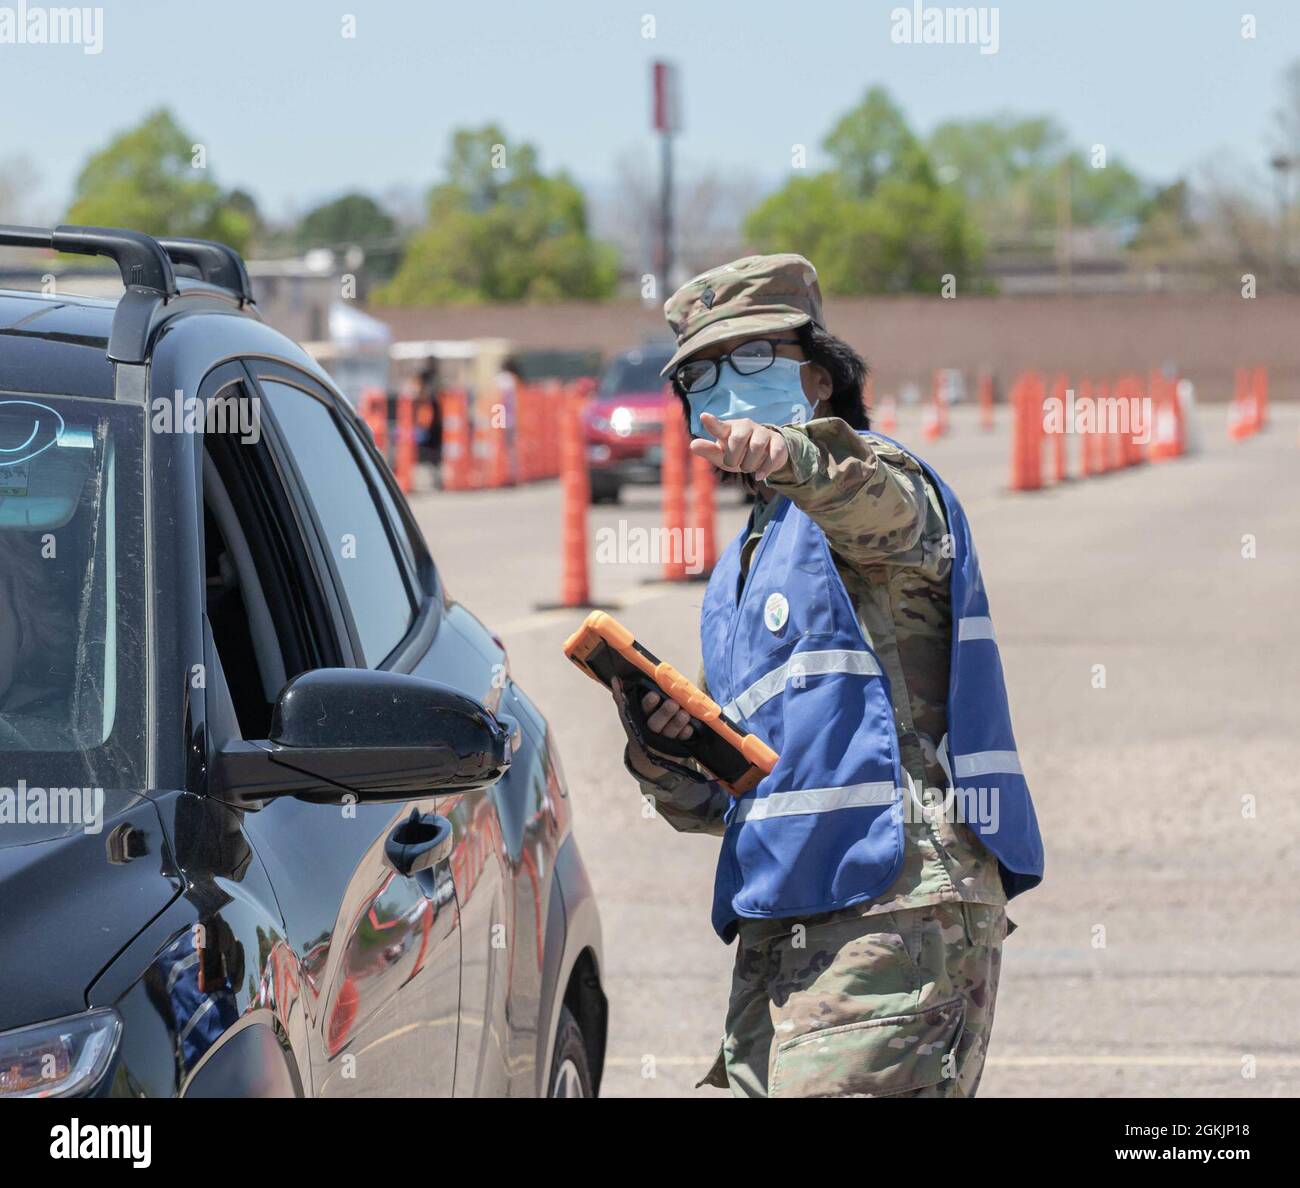 U.S. Army Spc. Omega Toledo, a combat medic assigned to 2nd Stryker Brigade Combat Team, 4th Infantry Division, directs a community member to their lane at the Community Vaccination Center at the Colorado State Fairgrounds in Pueblo, Colorado, May 6, 2021. The Soldier from Fort Carson, Colorado, support the federal vaccination mission in Pueblo, Colorado. U.S. Northern Command, through U.S. Army North, remains committed to providing continued, flexible Department of Defense support to the Federal Emergency Management Agency as part of the whole-of-government response to COVID-19. Stock Photo